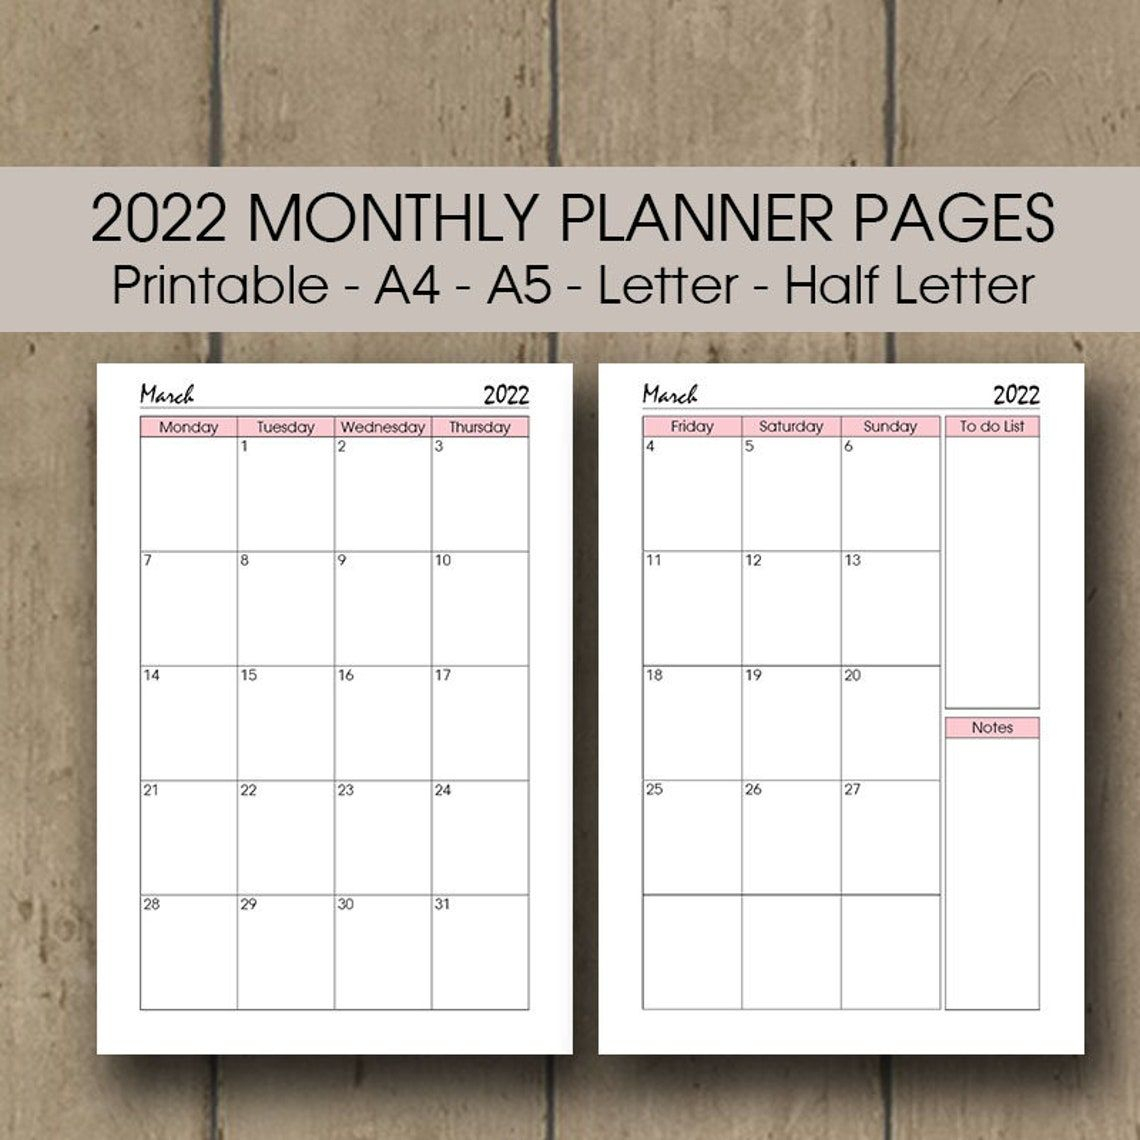 2022 Calendar Page Printable 2022 Monthly Planner Insert